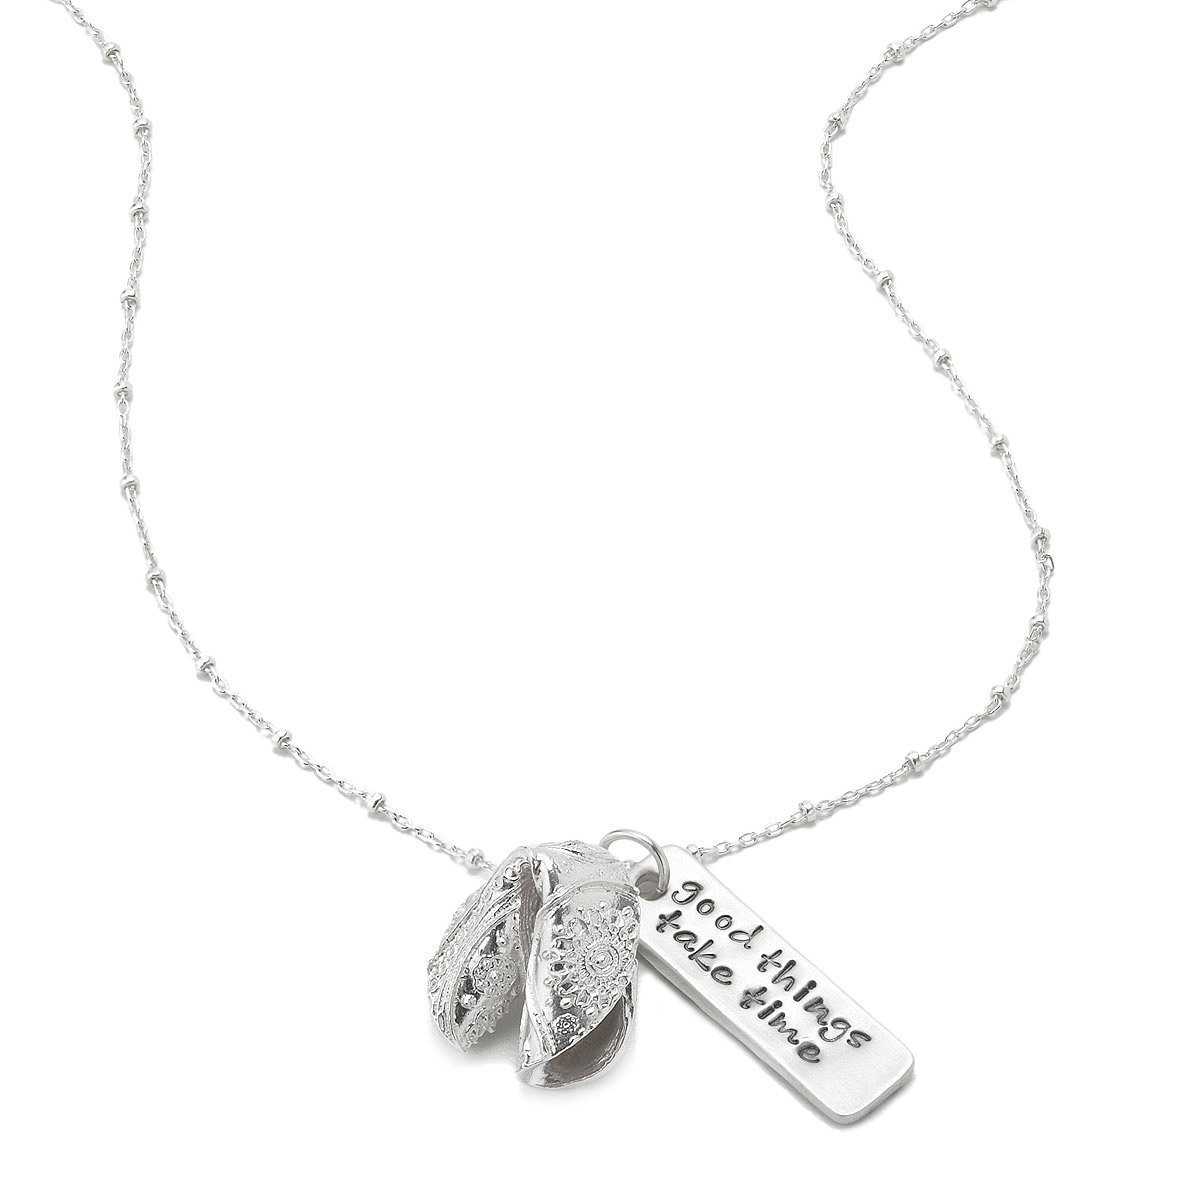 Personalized Fortune Cookie Necklace